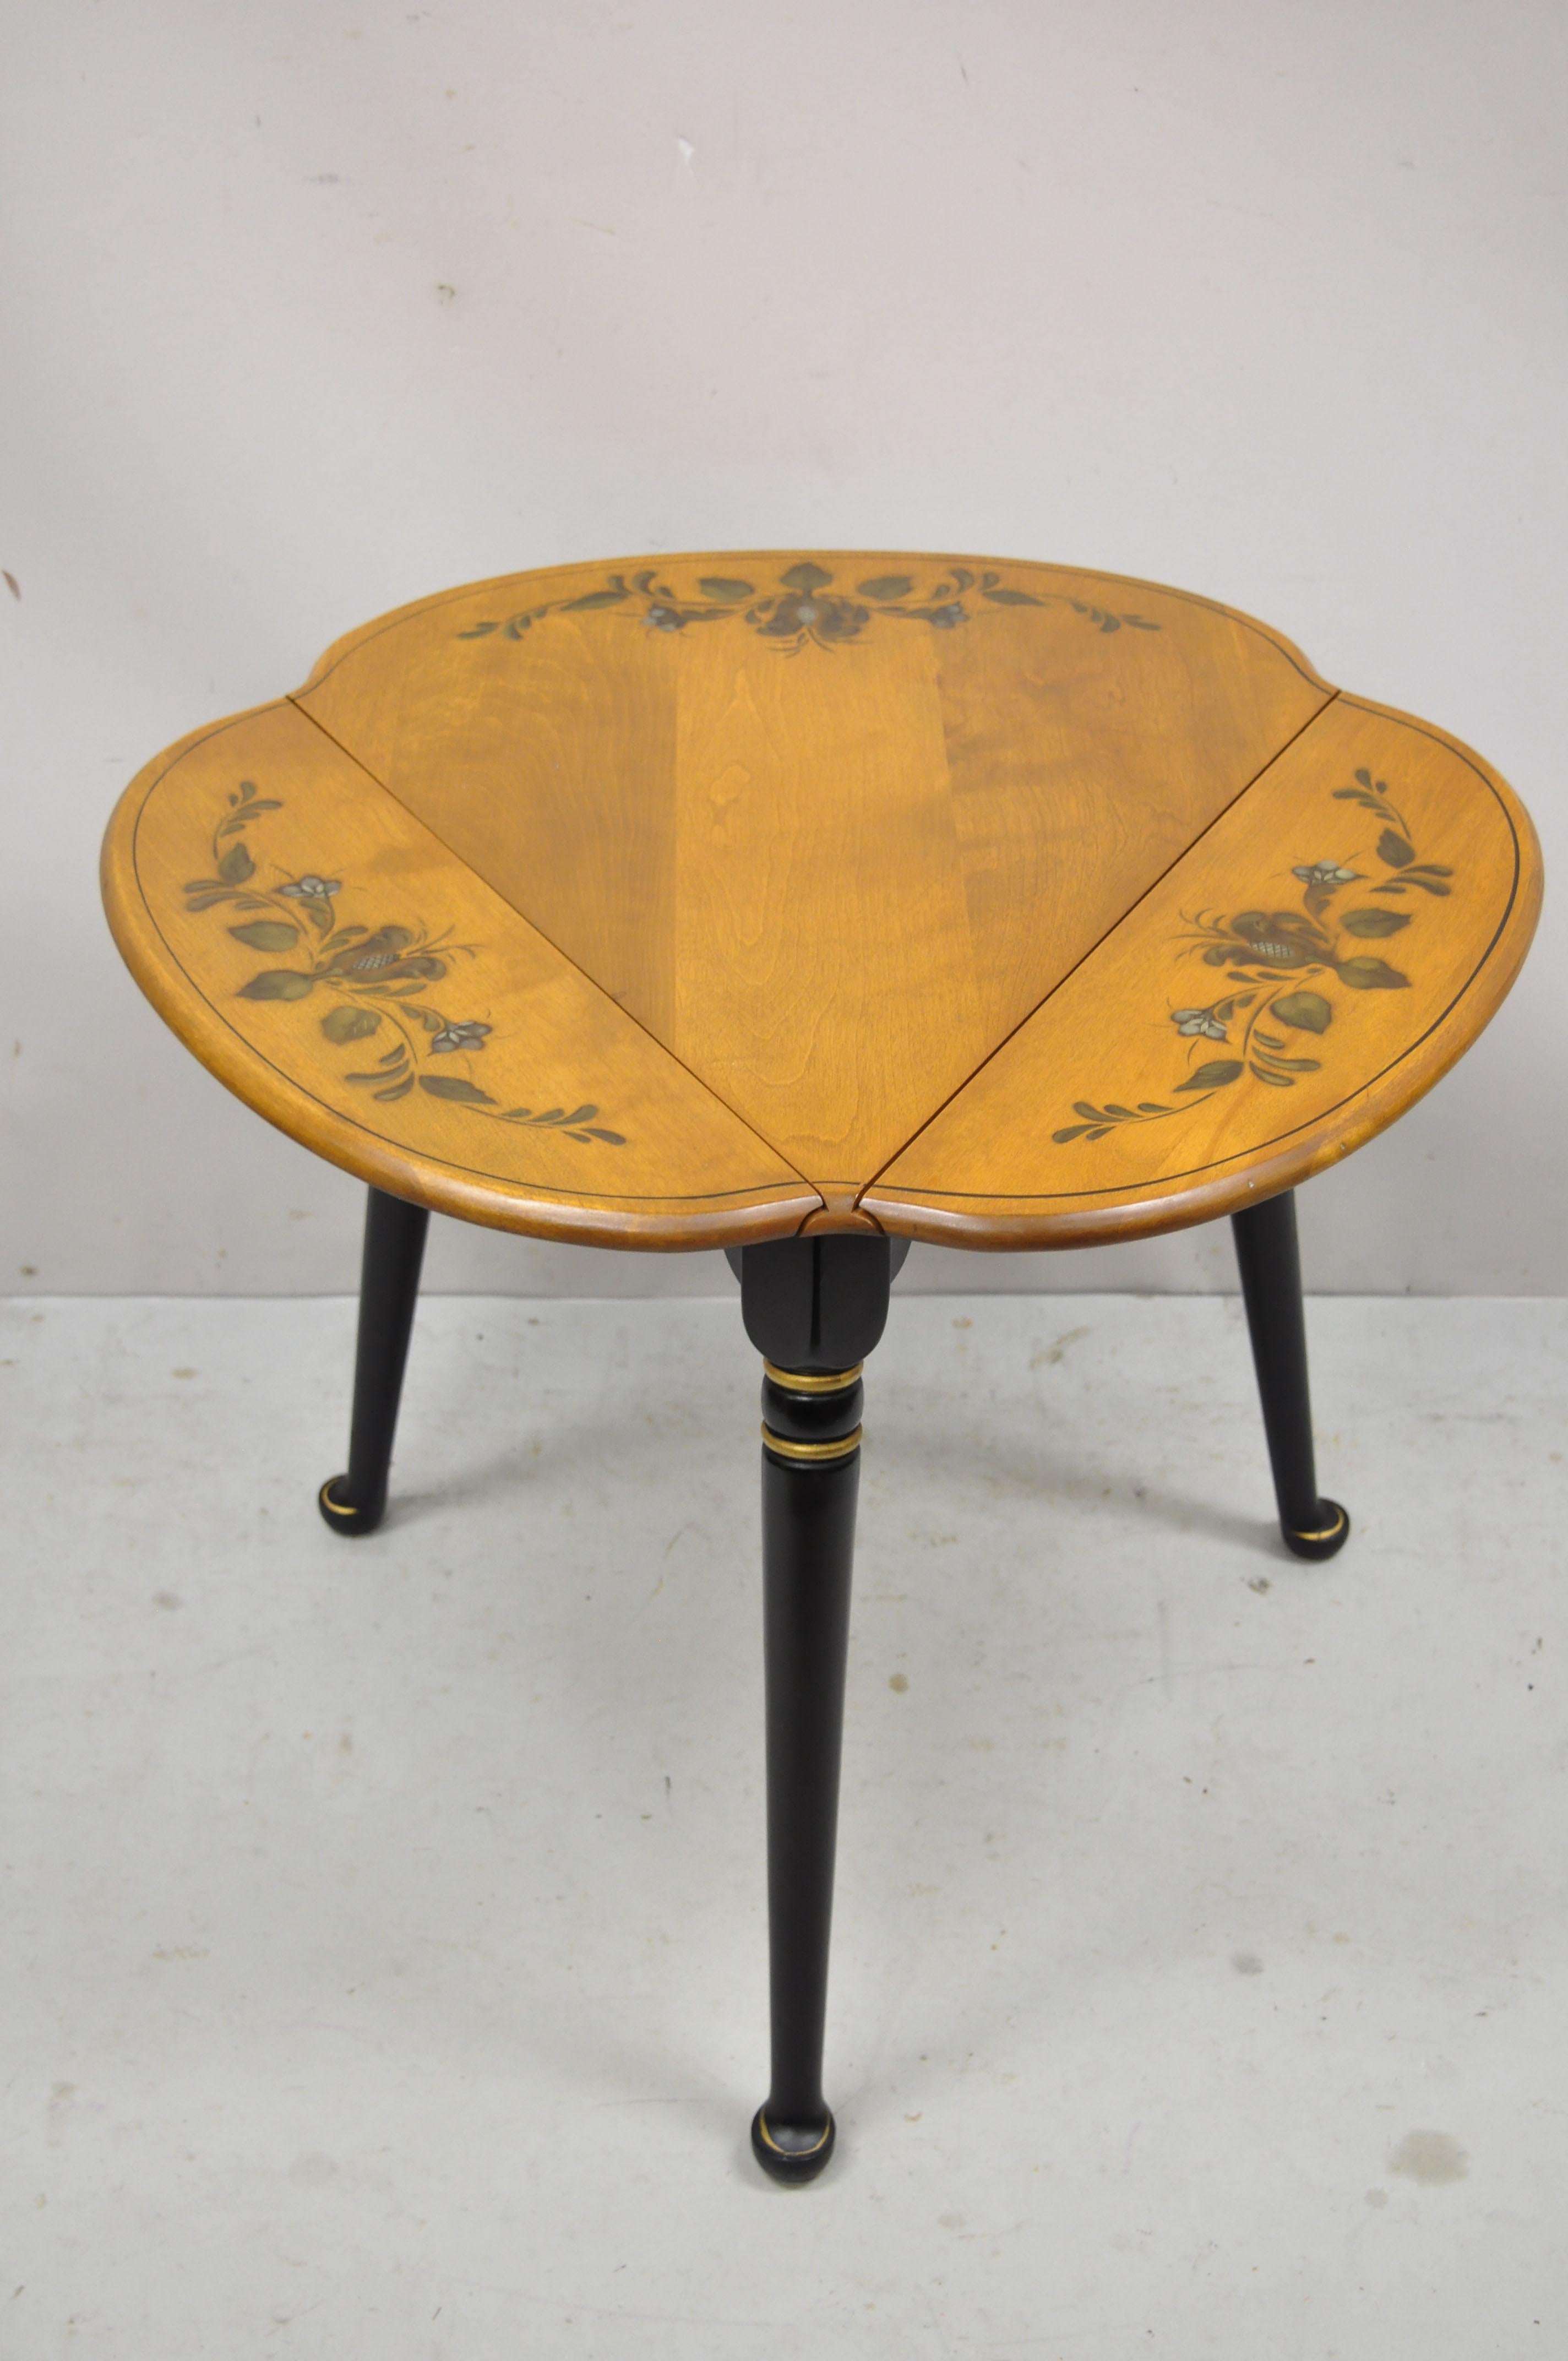 hitchcock drop leaf table and chairs